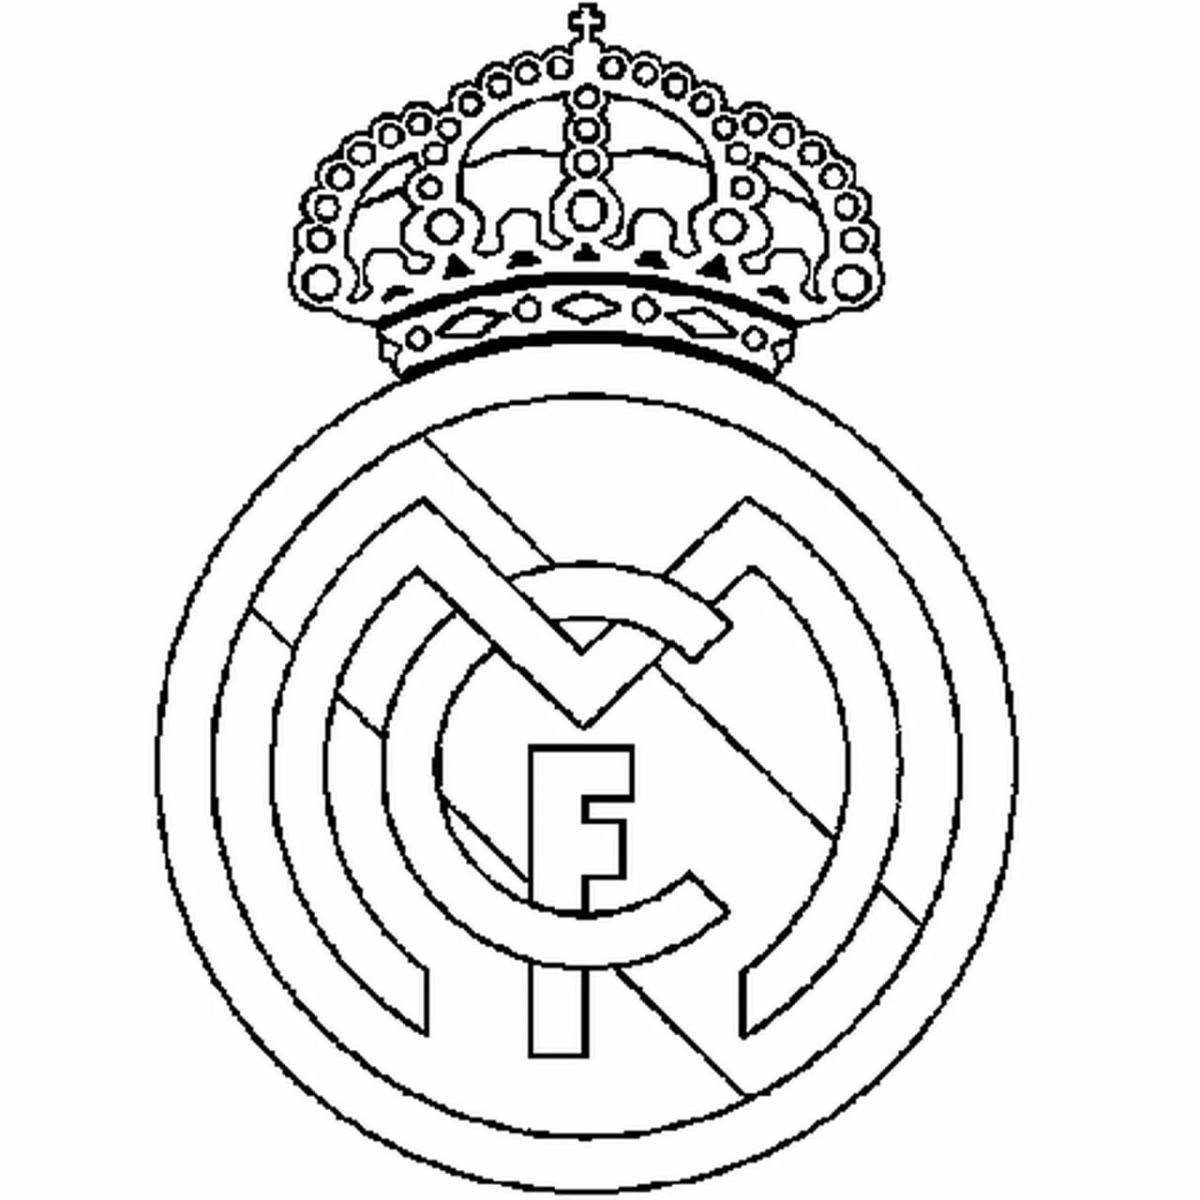 Delightful psg icon coloring page